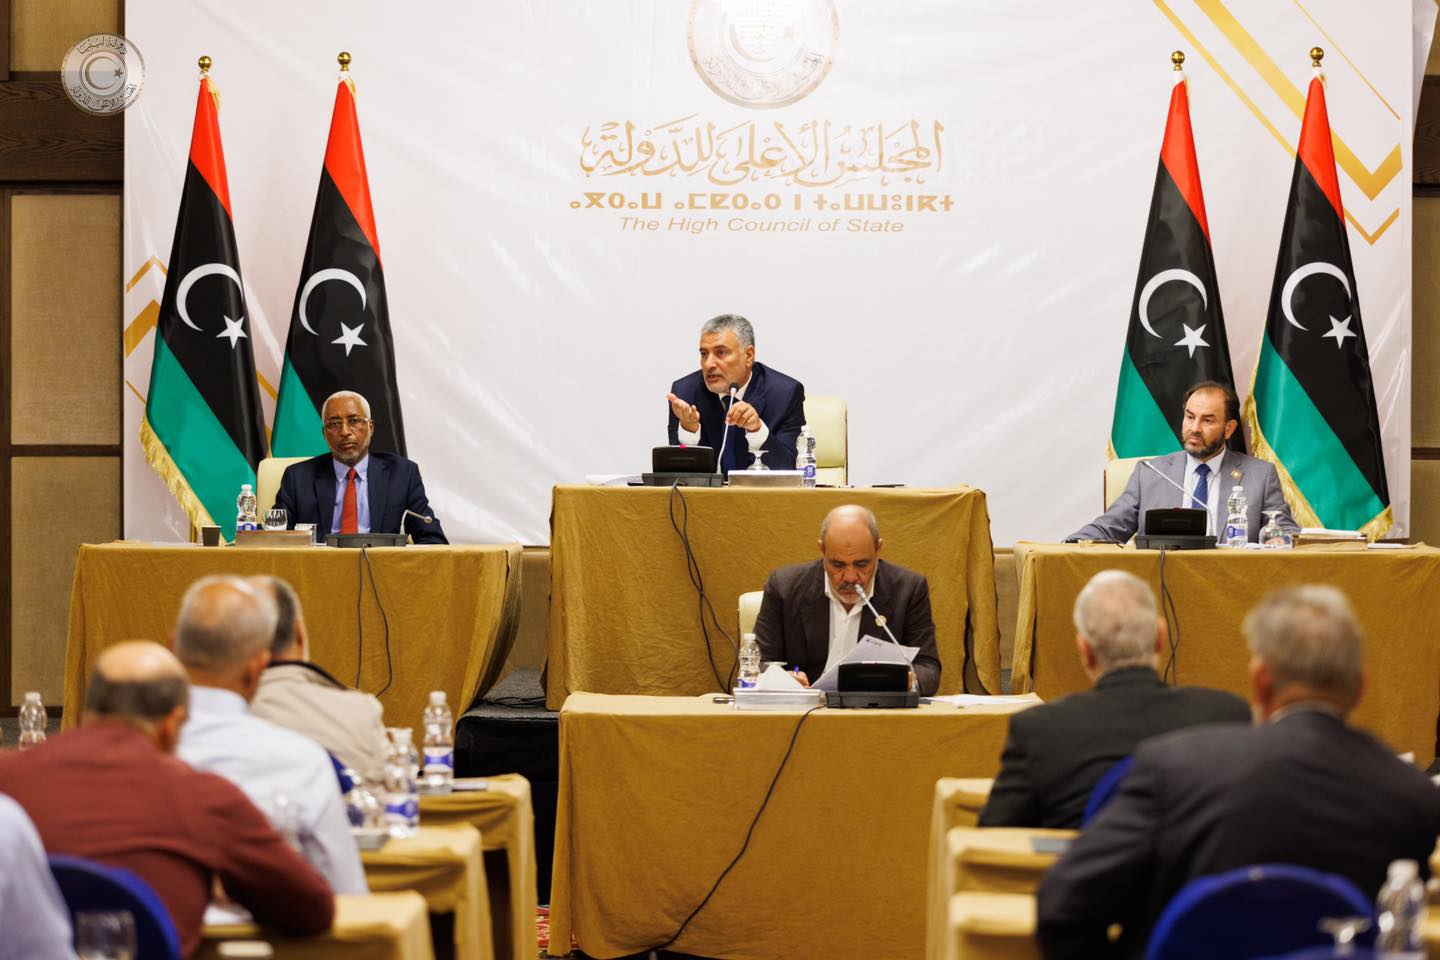 The High Council of State resumes its suspended (ninetieth) session at its headquarters in Tripoli.